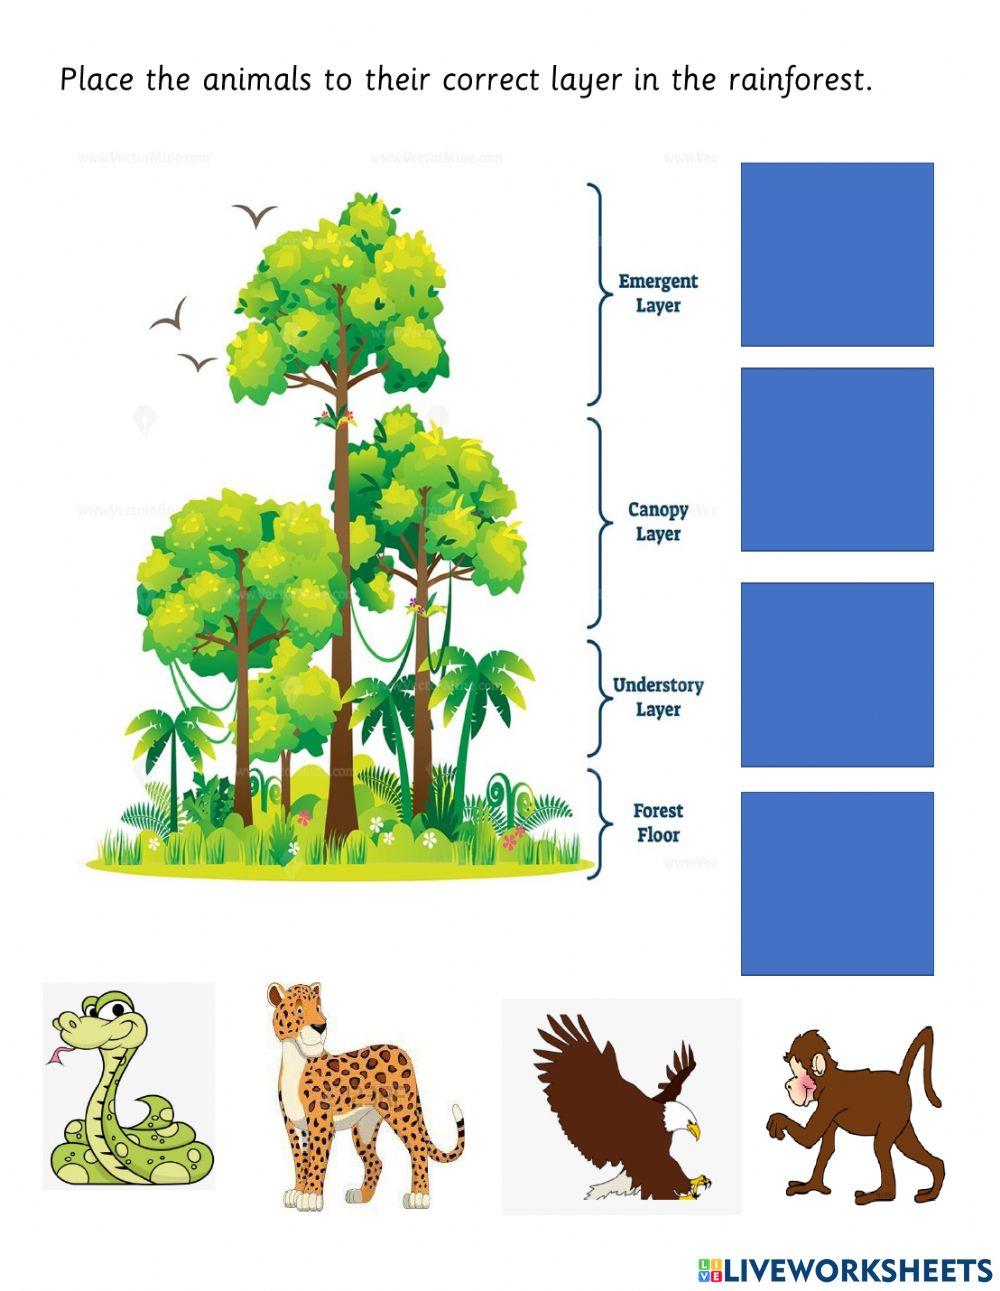 Rainforest animals and the layers